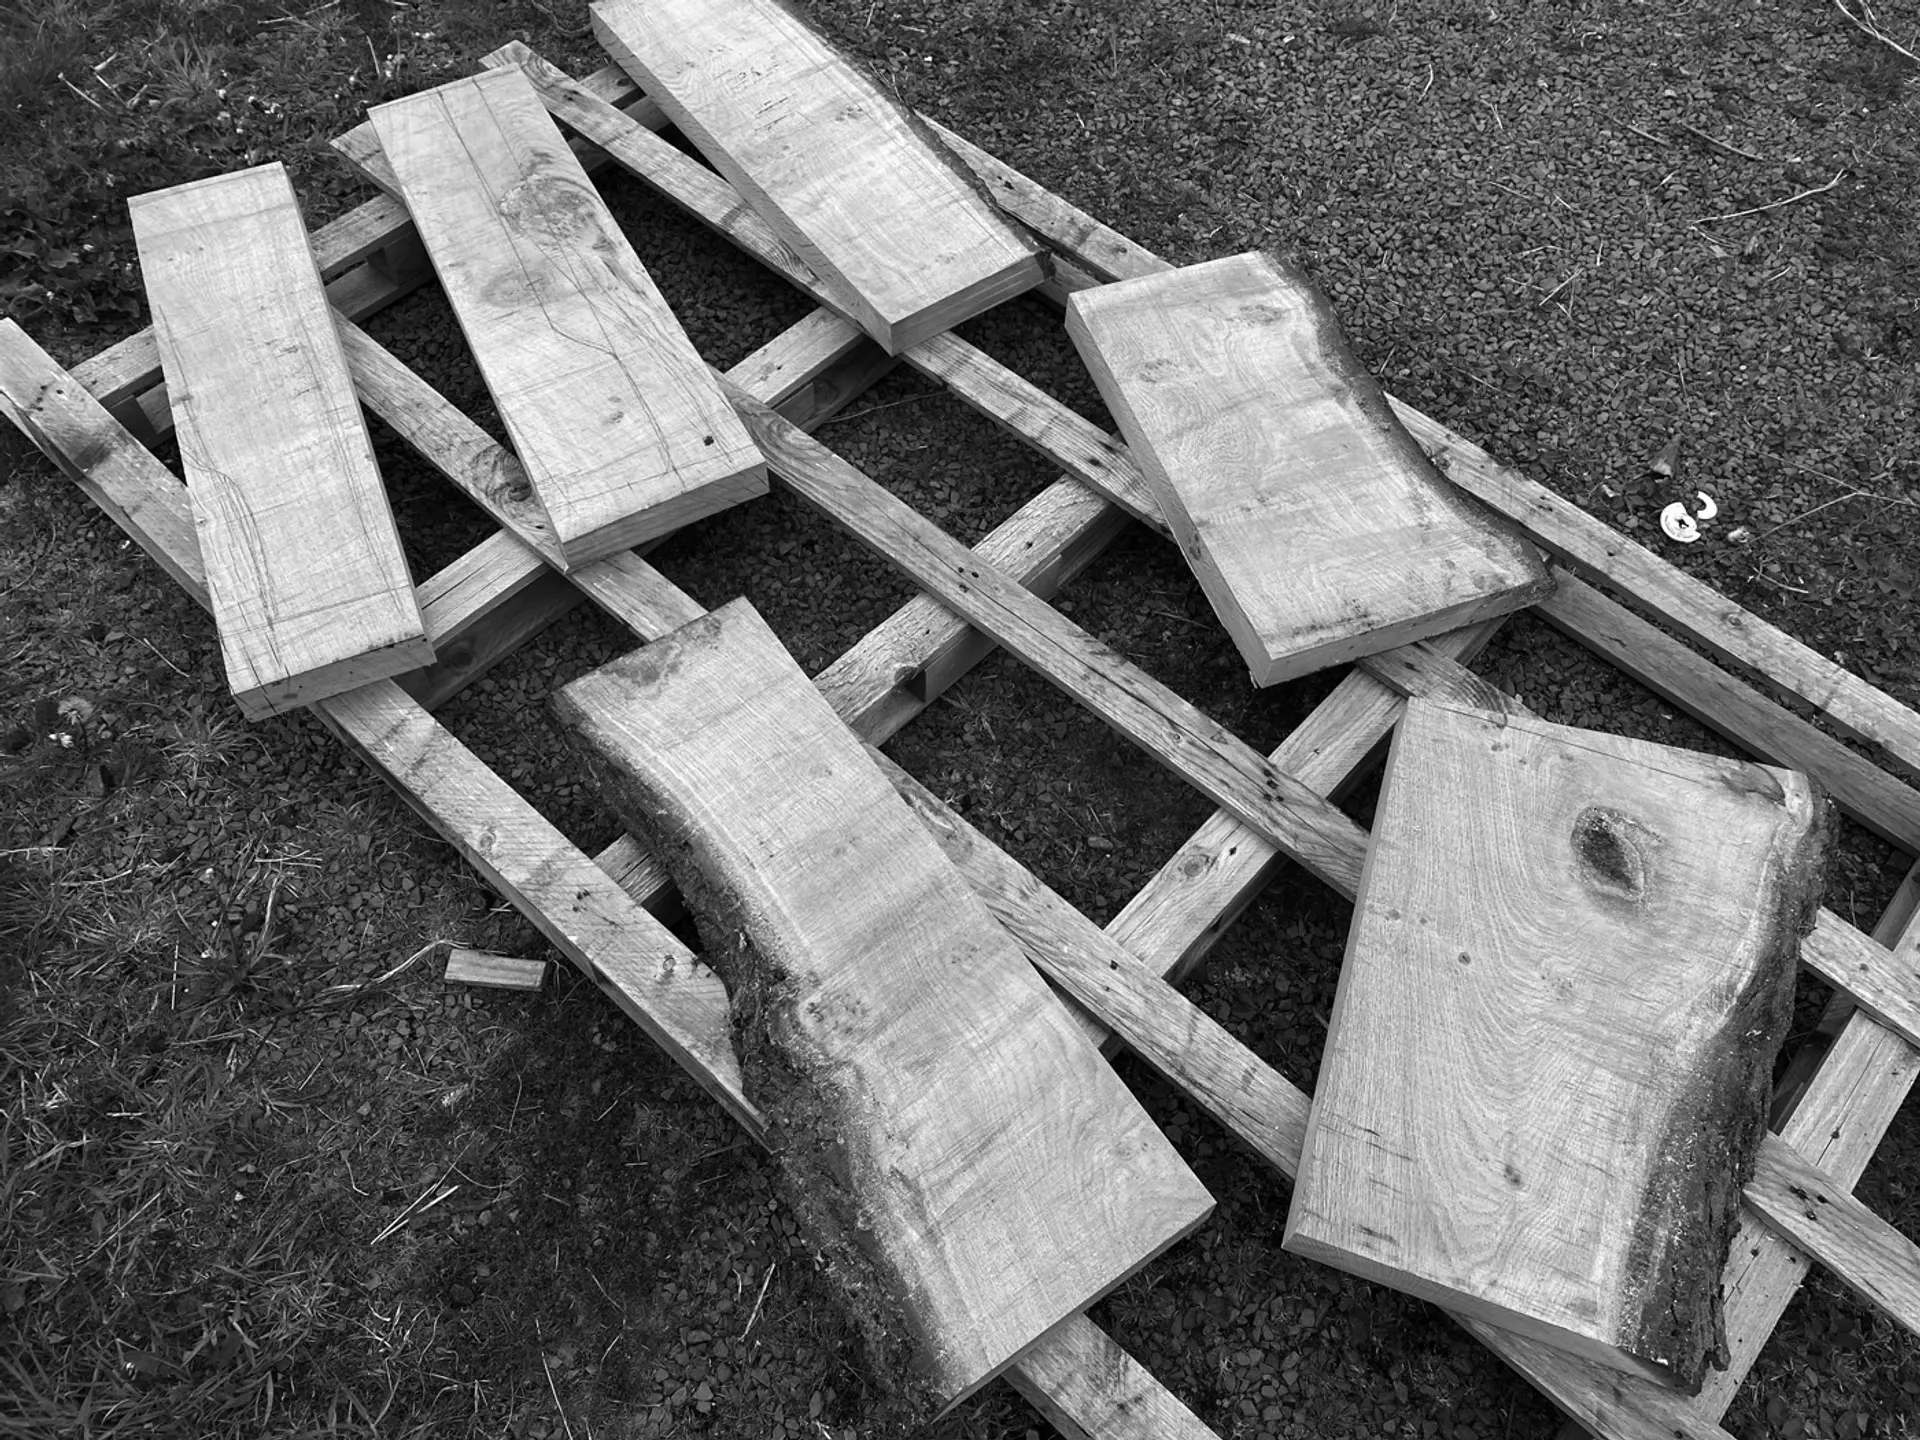 A greyscale photograph shows a lattice-like wooden structure lying on an earthy surface. Similarly- sized pieces of cut wood that still have pieces of tree-trunk attached, are laid out across the lattice.